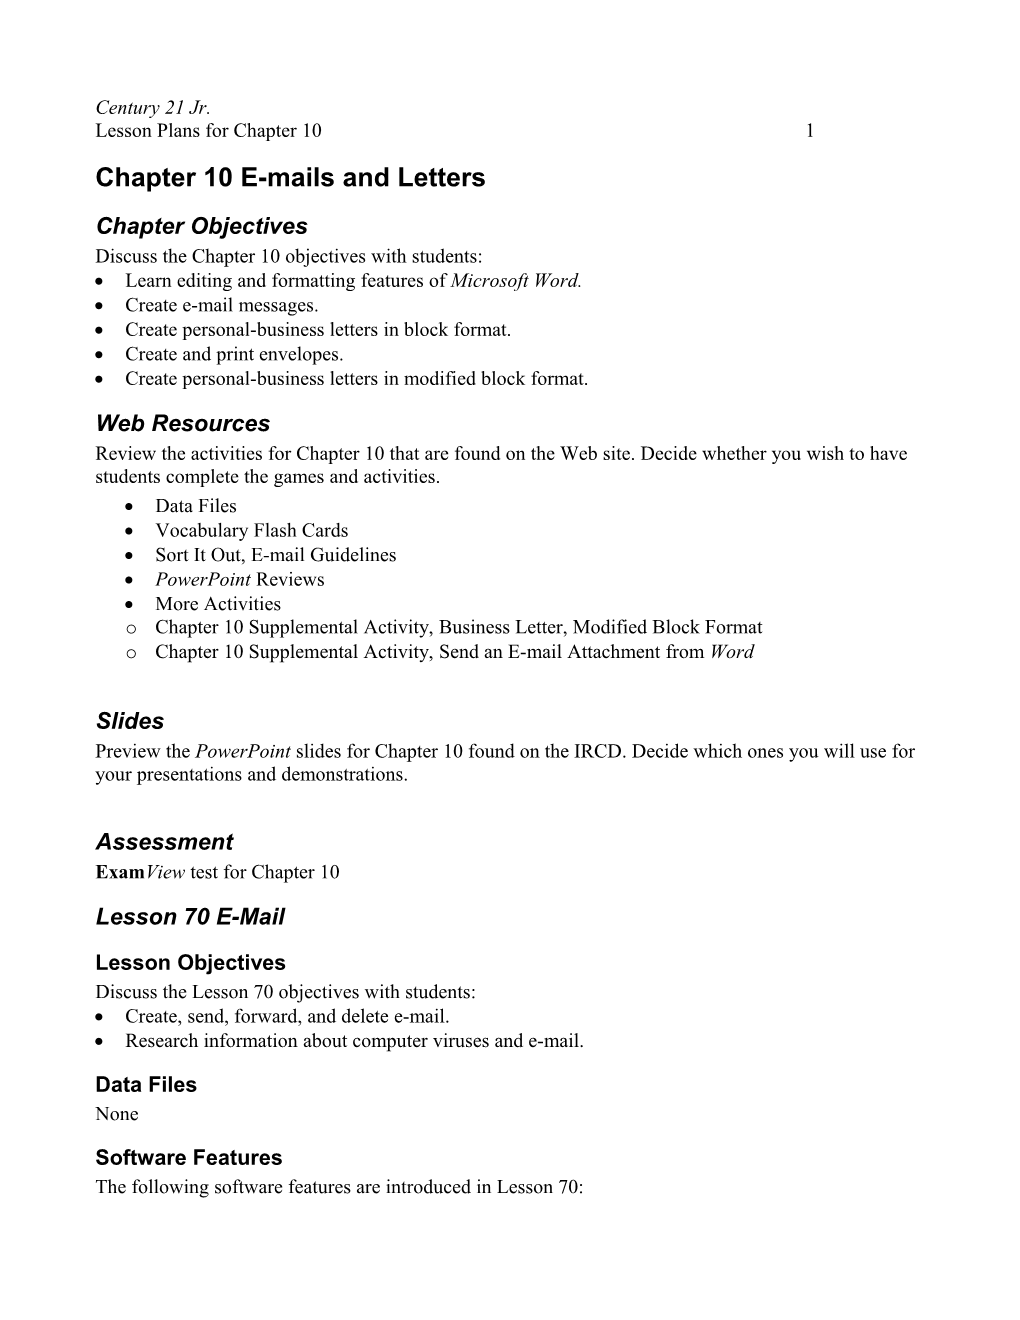 Chapter 10 E-Mails and Letters